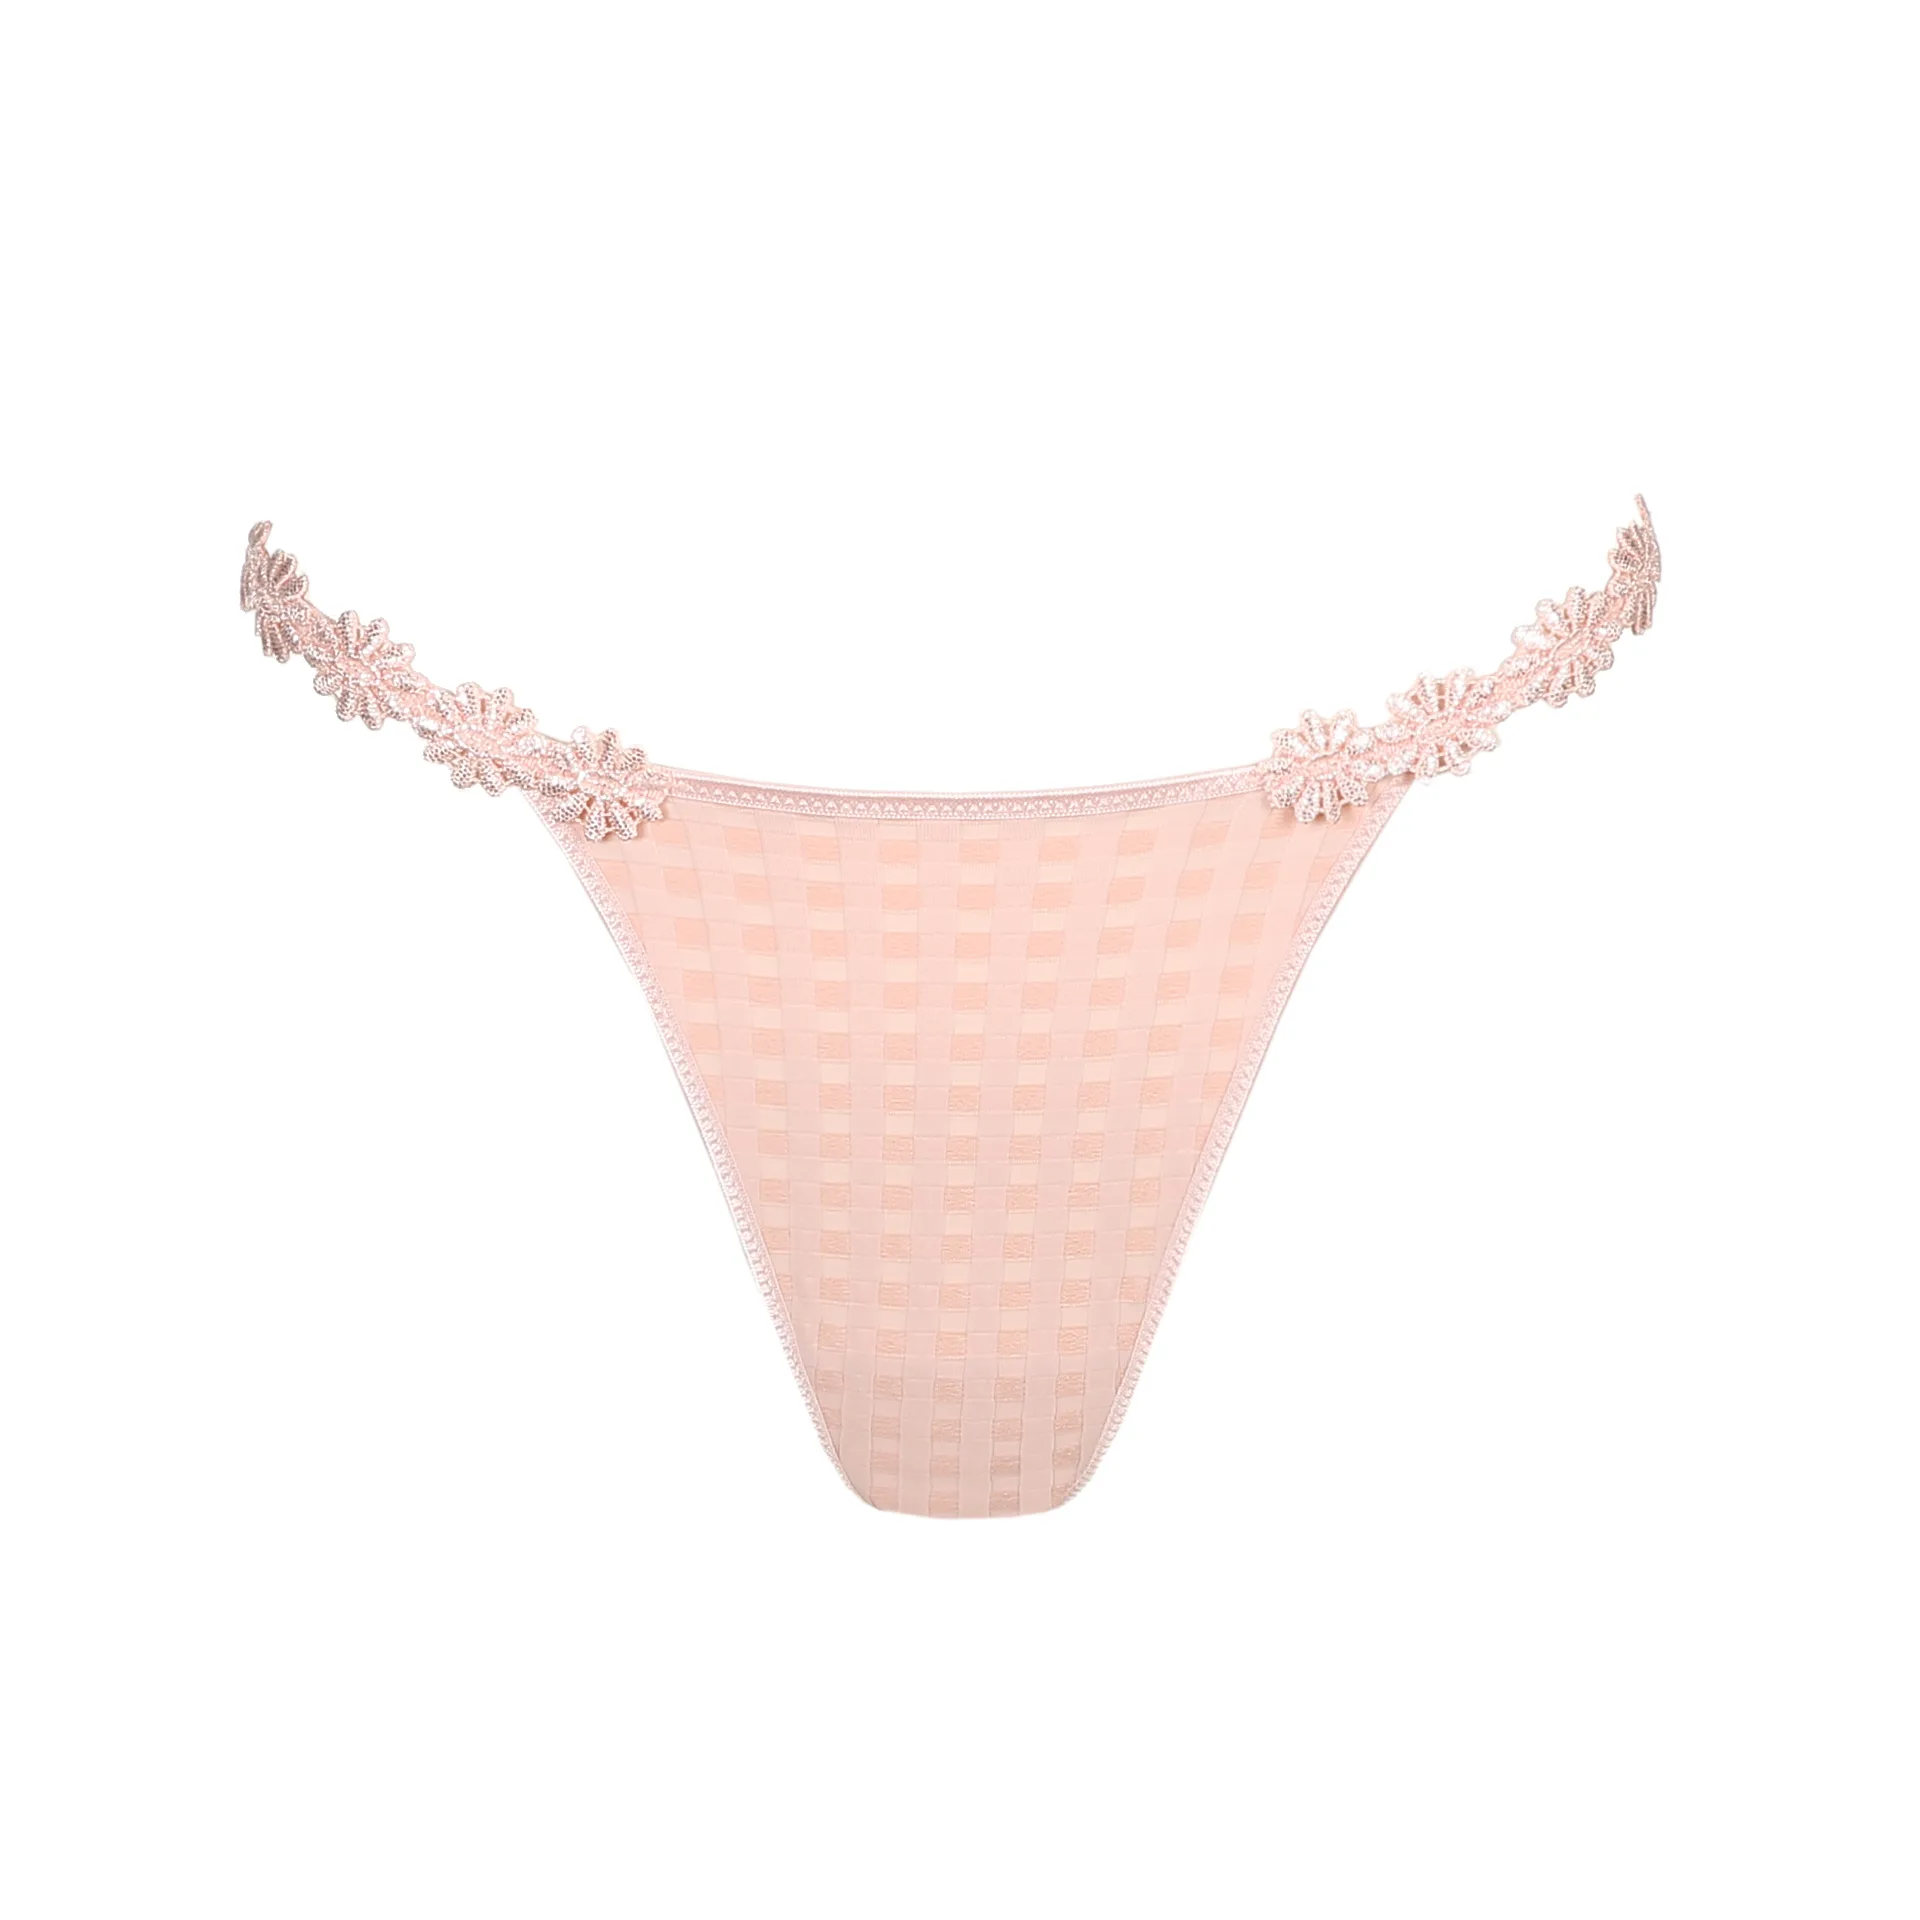 Marie Jo AVERO pearly pink thong